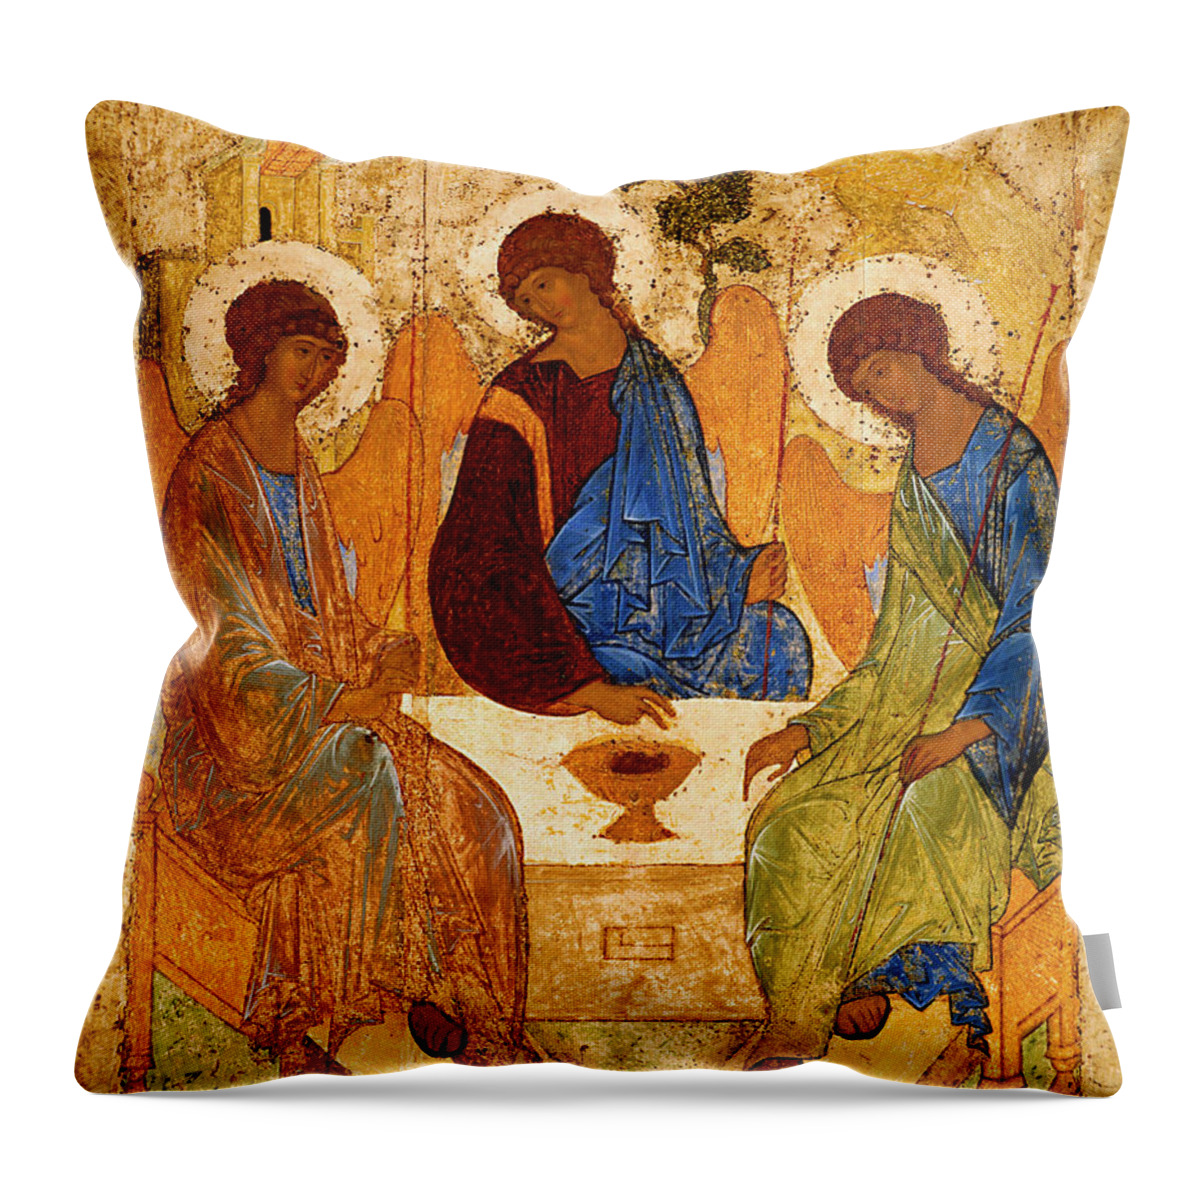 Holy Trinity Throw Pillow featuring the painting Holy Trinity by Andrei Rublev